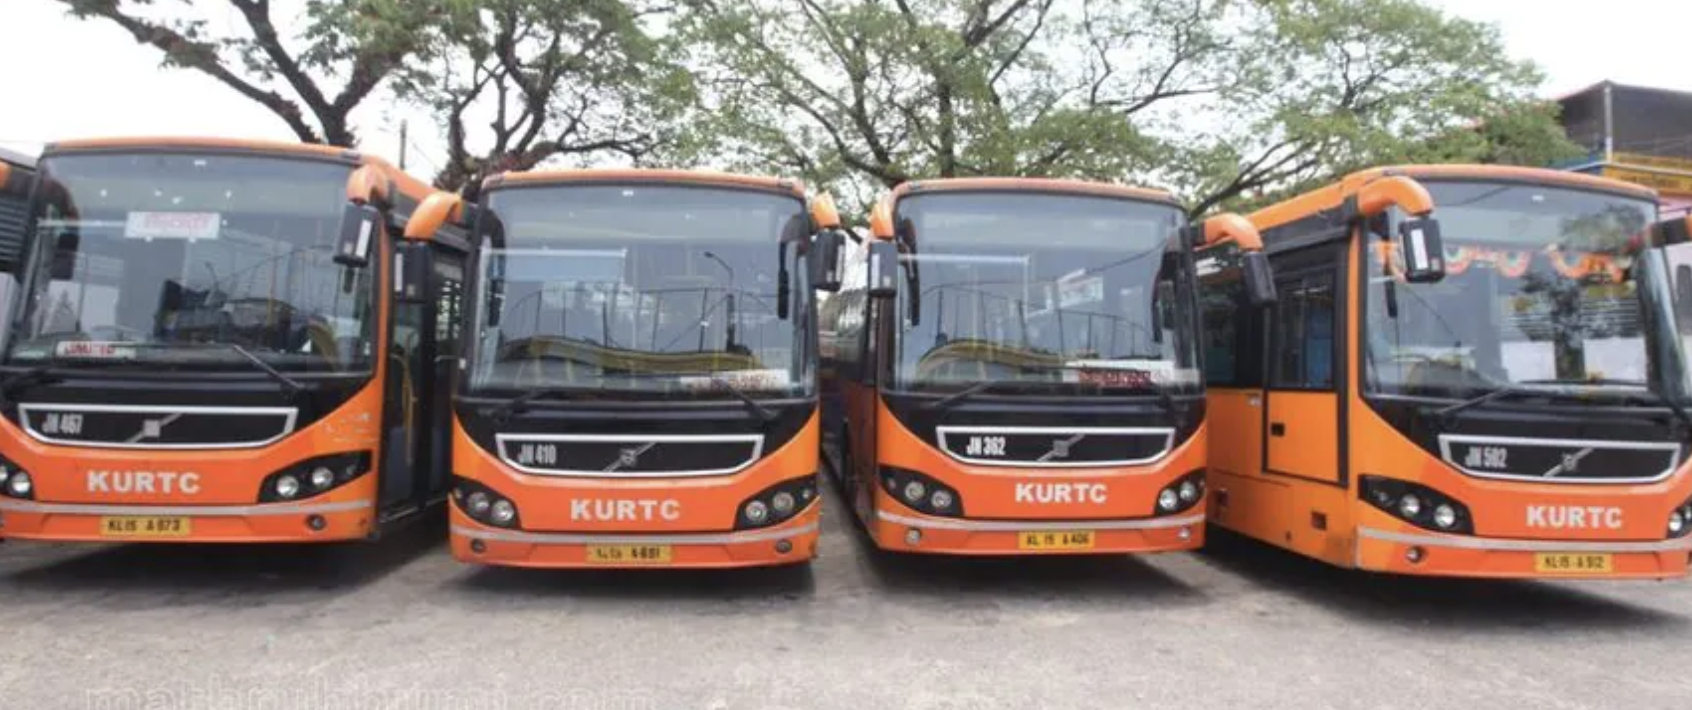 KSTRC low-level buses used for shool